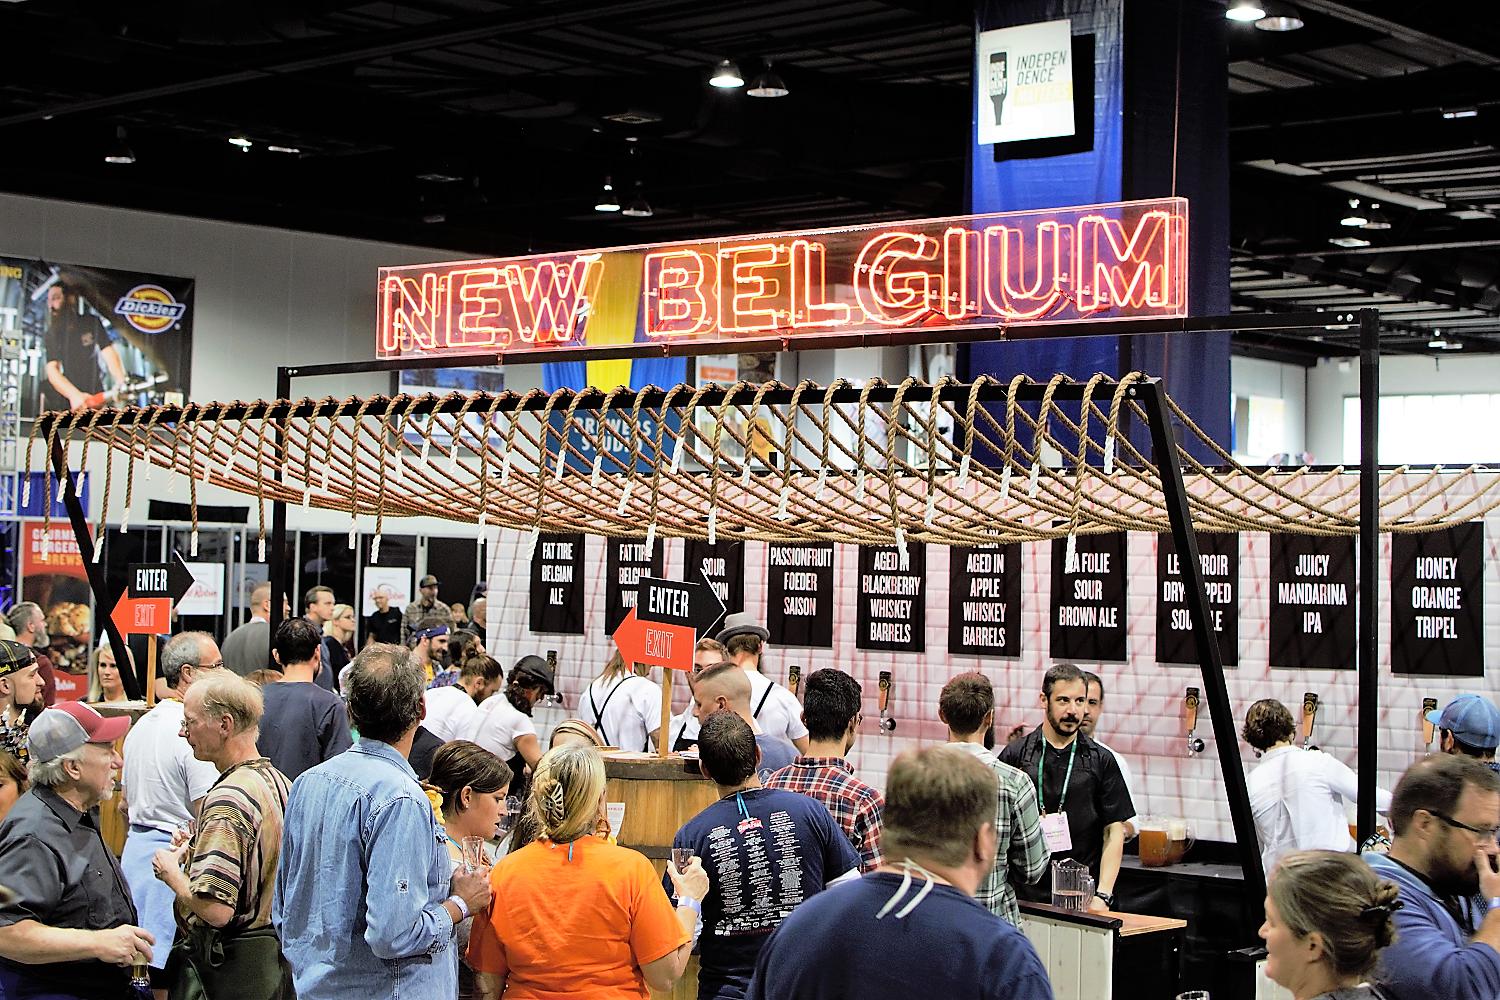 Guide to the Great American Beer Festival, with a map of the 2017 GABF award-winning beers - now get out there and drink local!